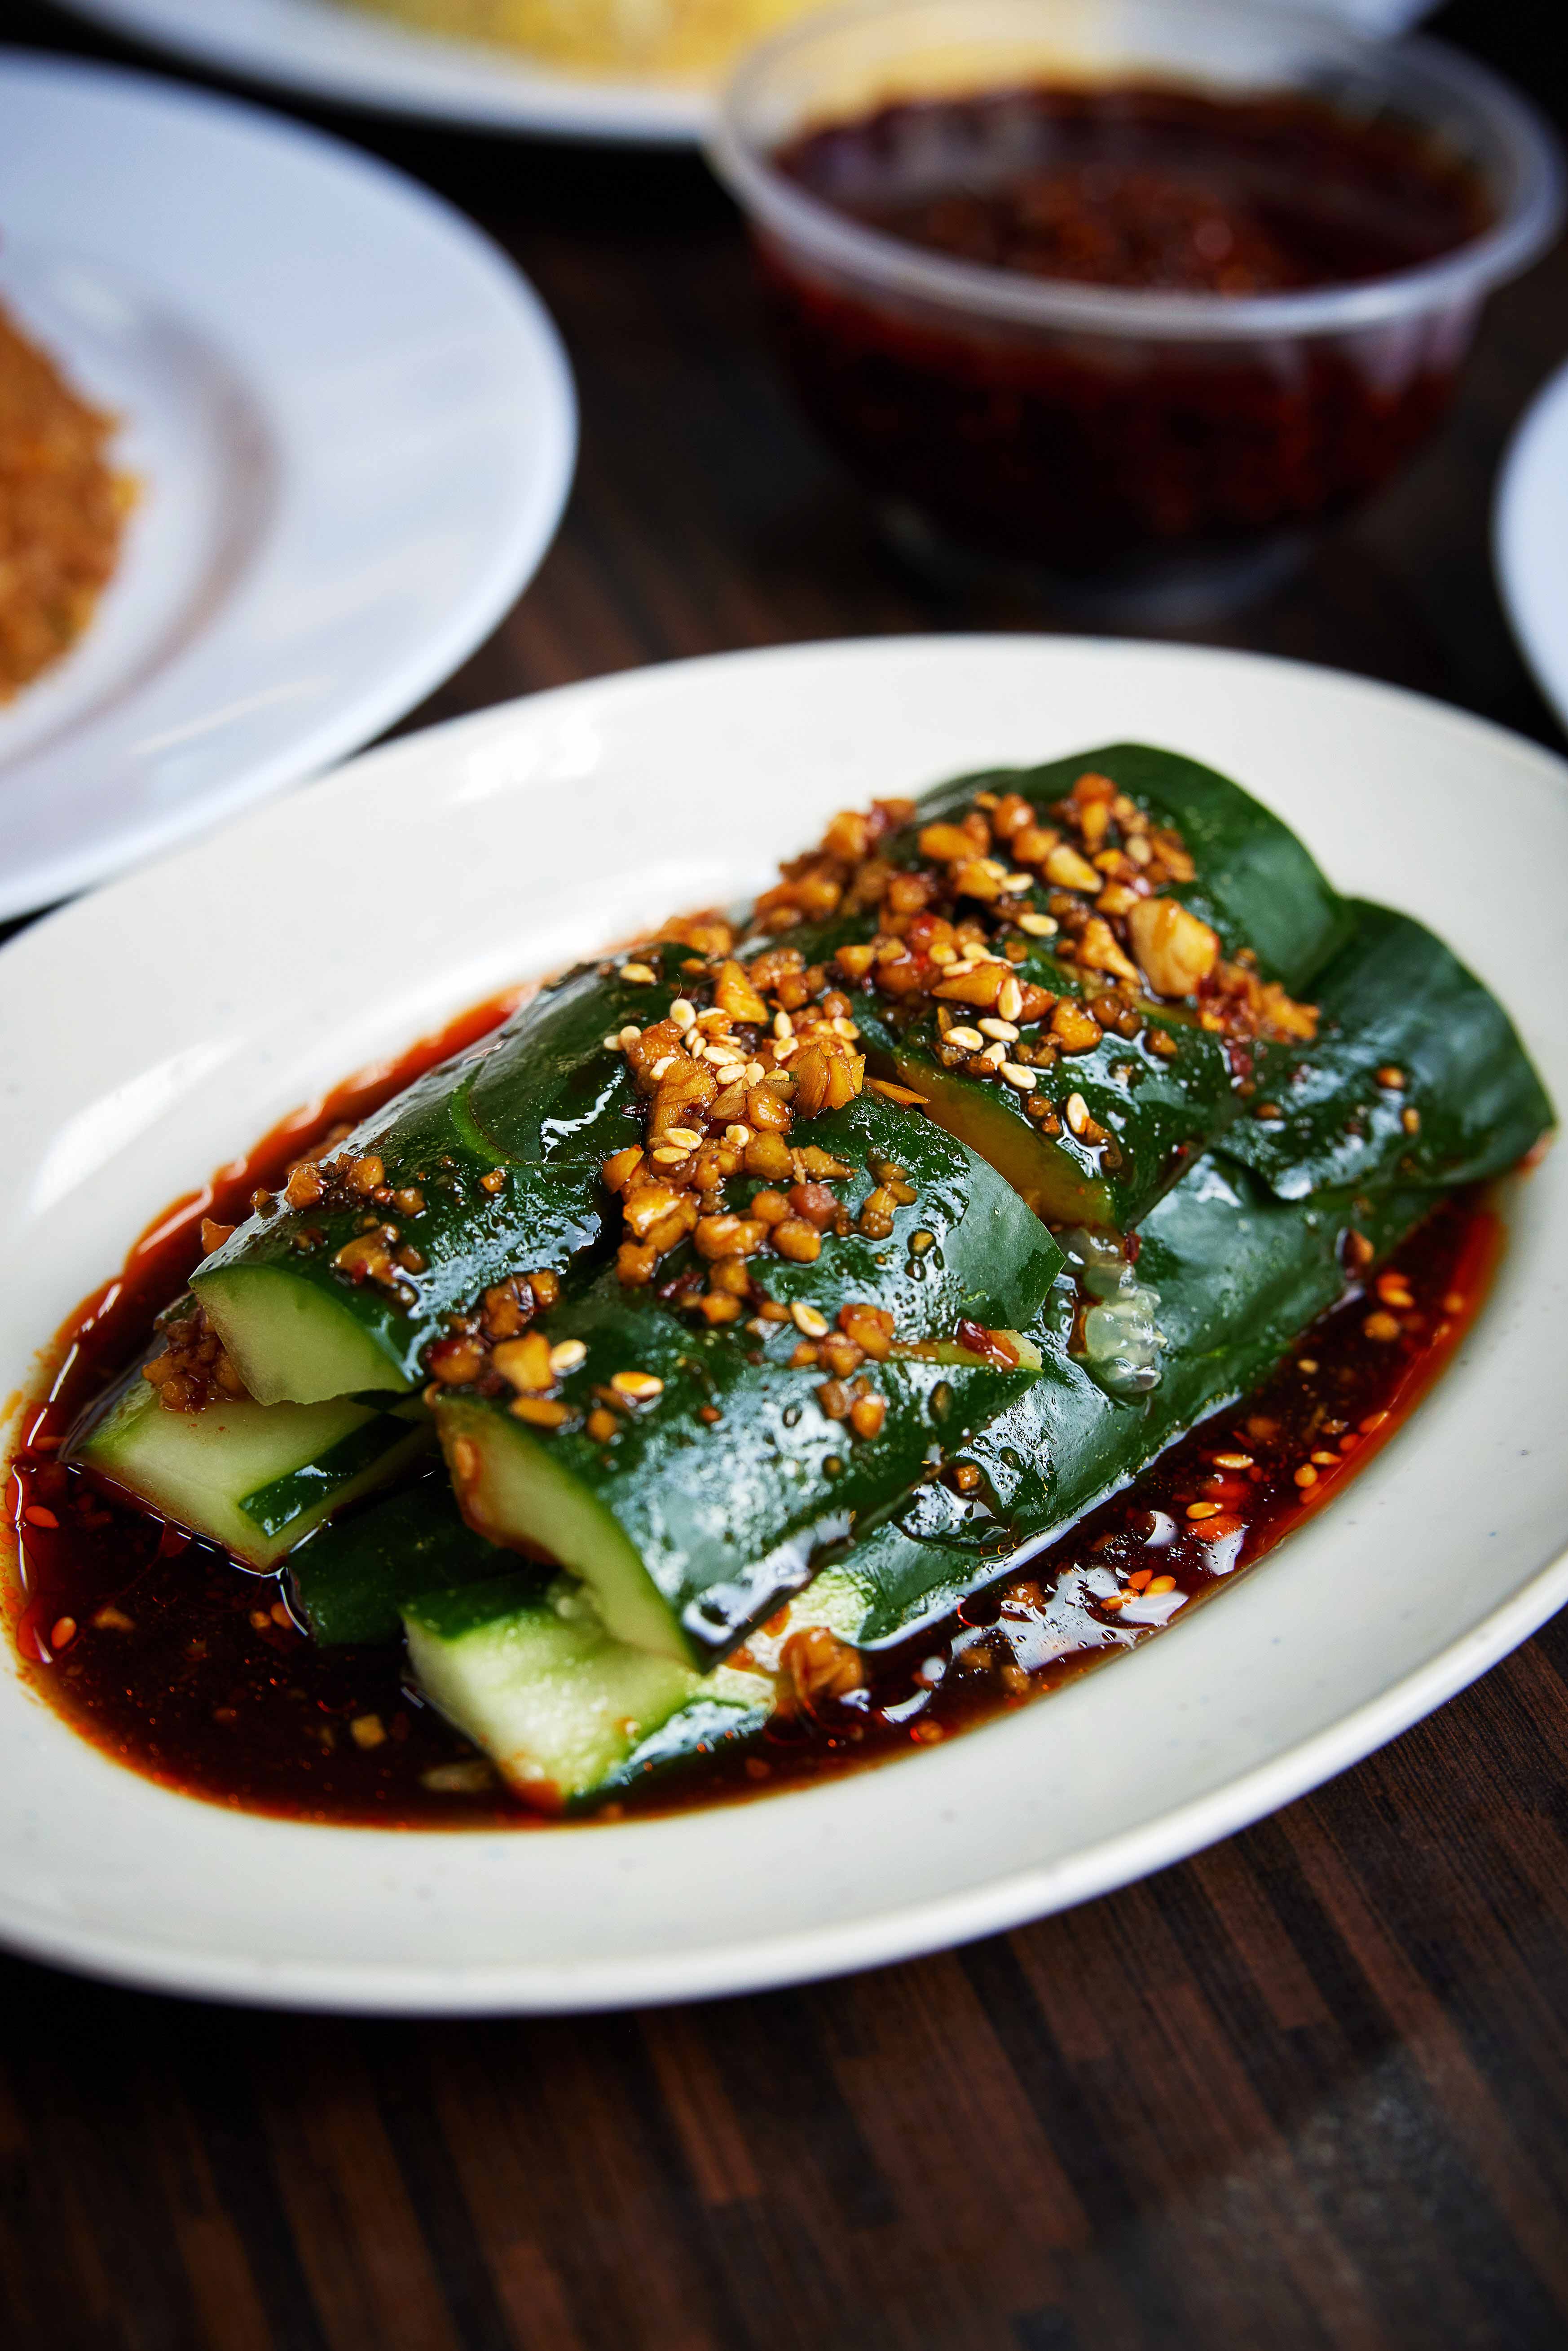 The Crunchy Cucumber In Spicy Sauce, $3.80